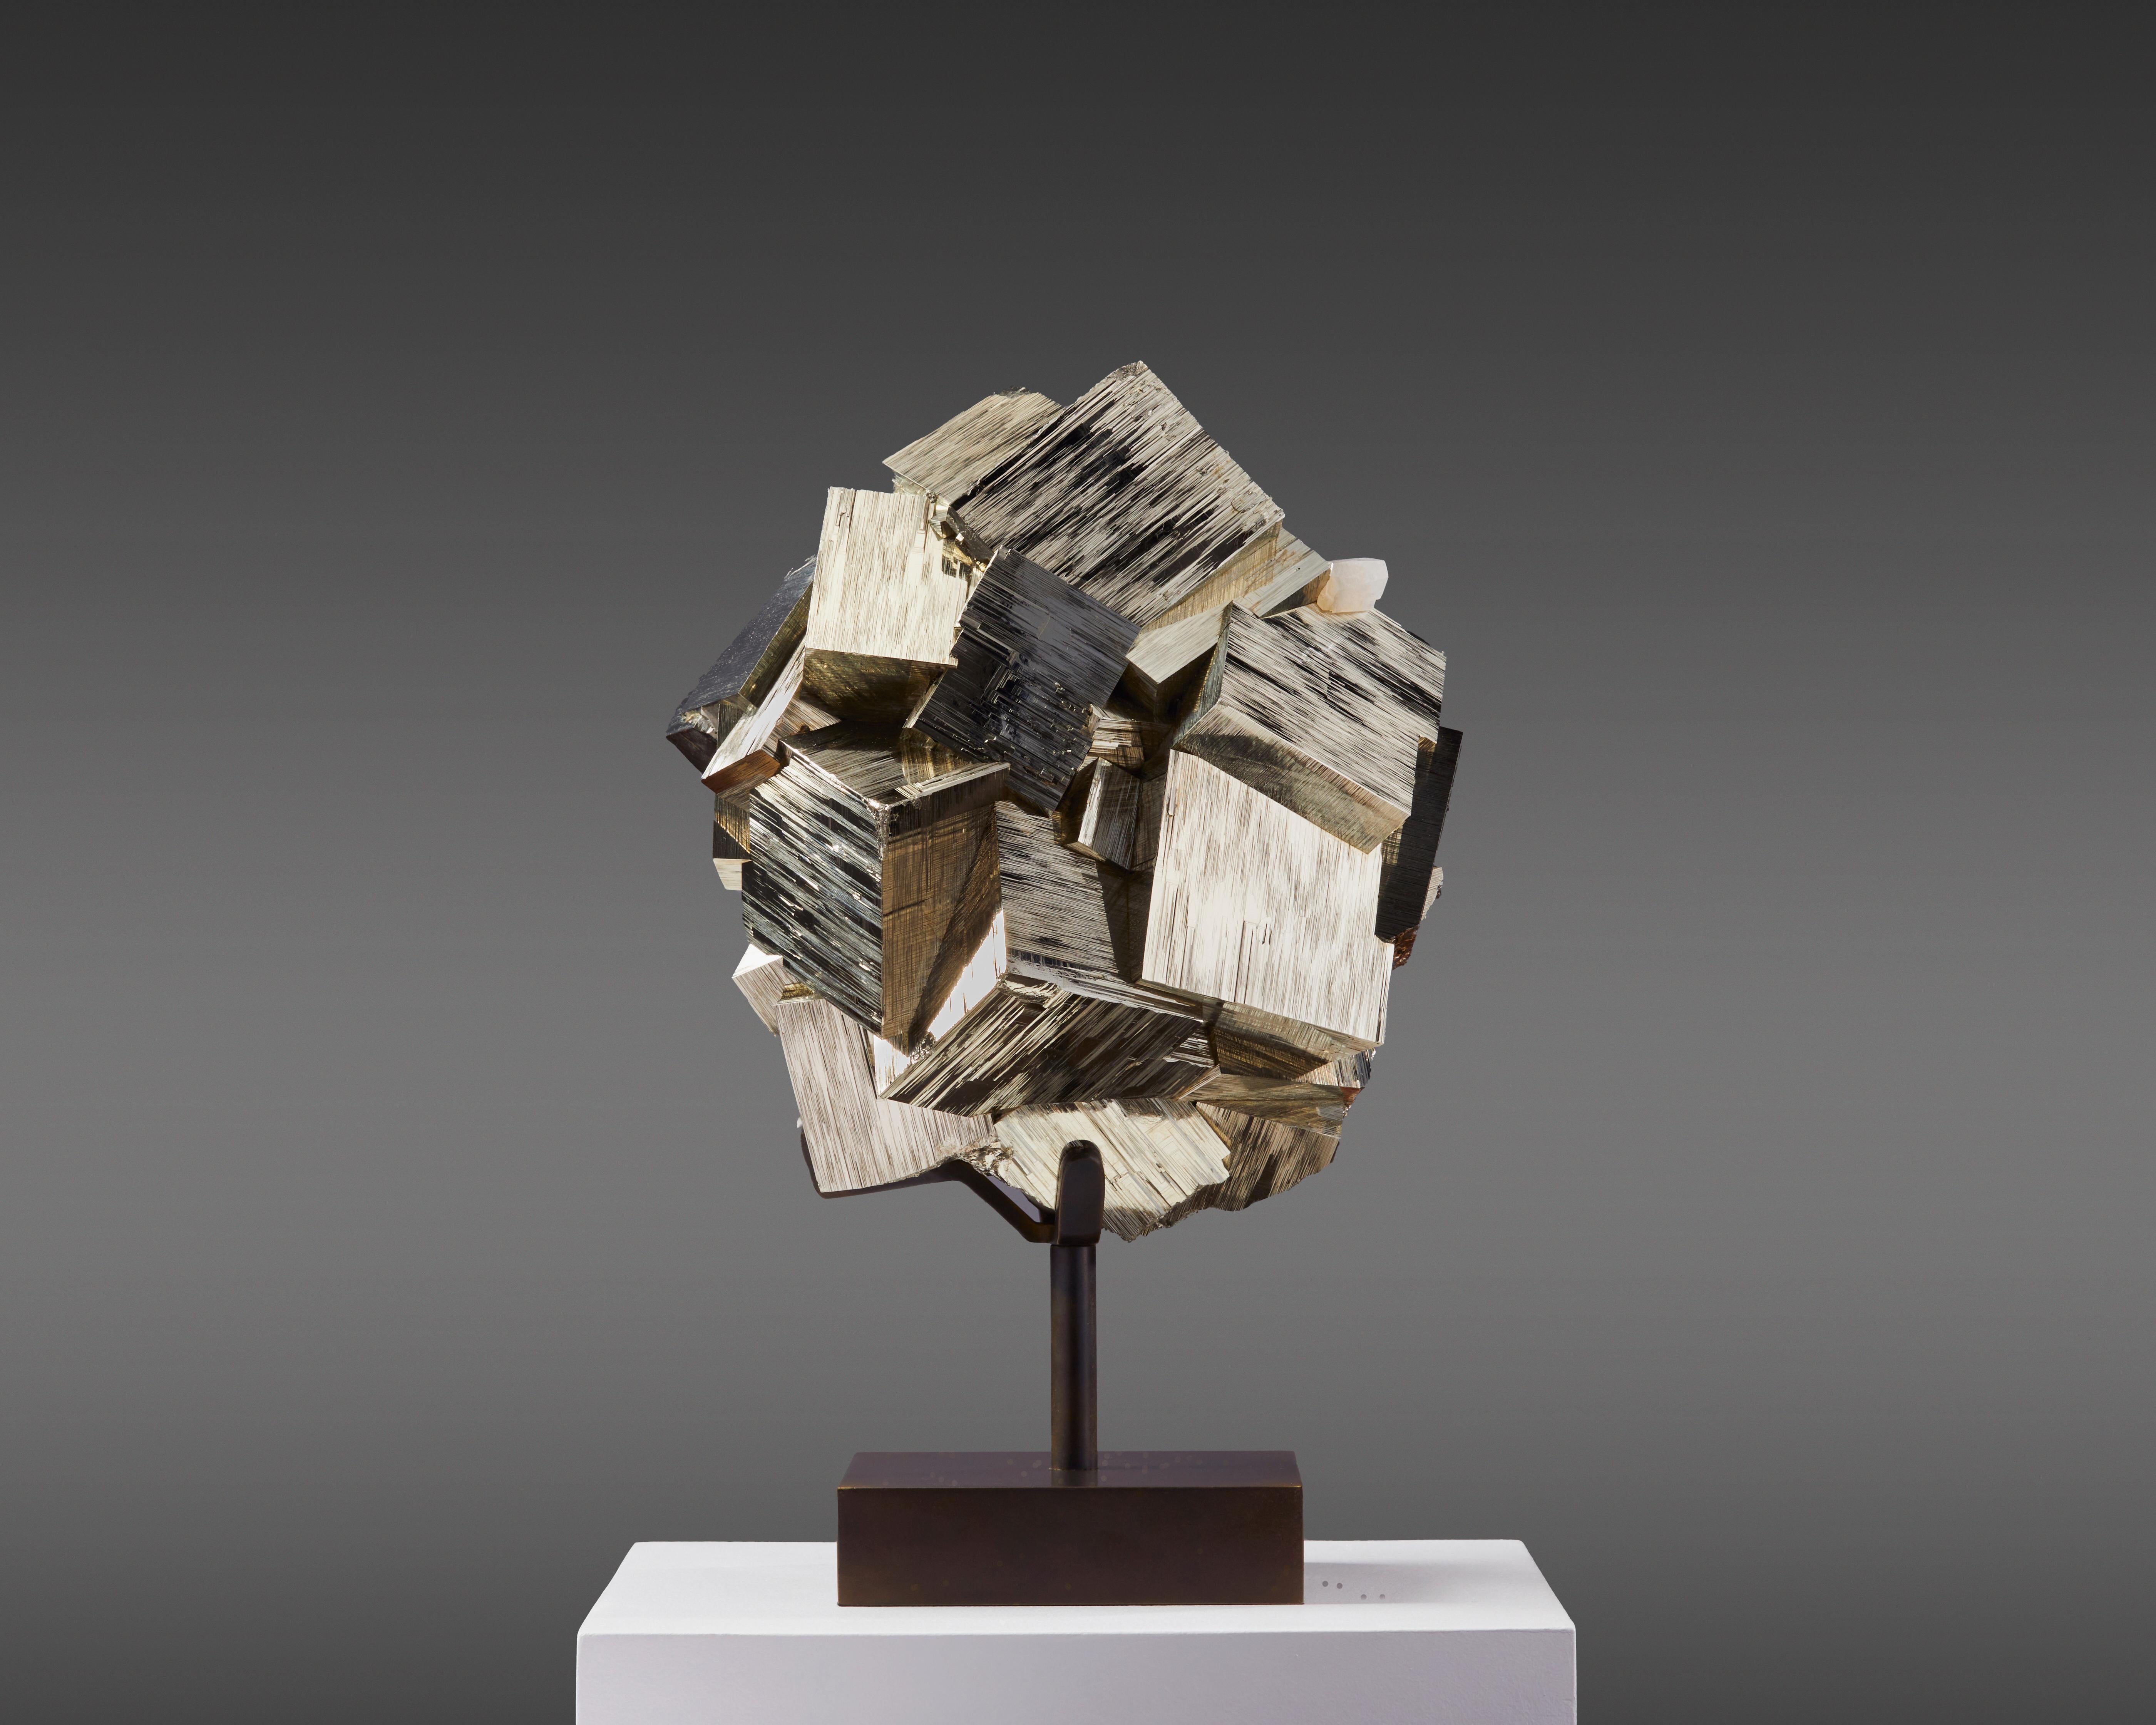 Stunning Pyrite piece from the mineral-rich soils of Peru, this
piece is a symphony of metallic luster and geometric precision.
Its perfect cubic crystals are interlocked in a captivating display,
each reflecting the light with a mirror-like sheen.